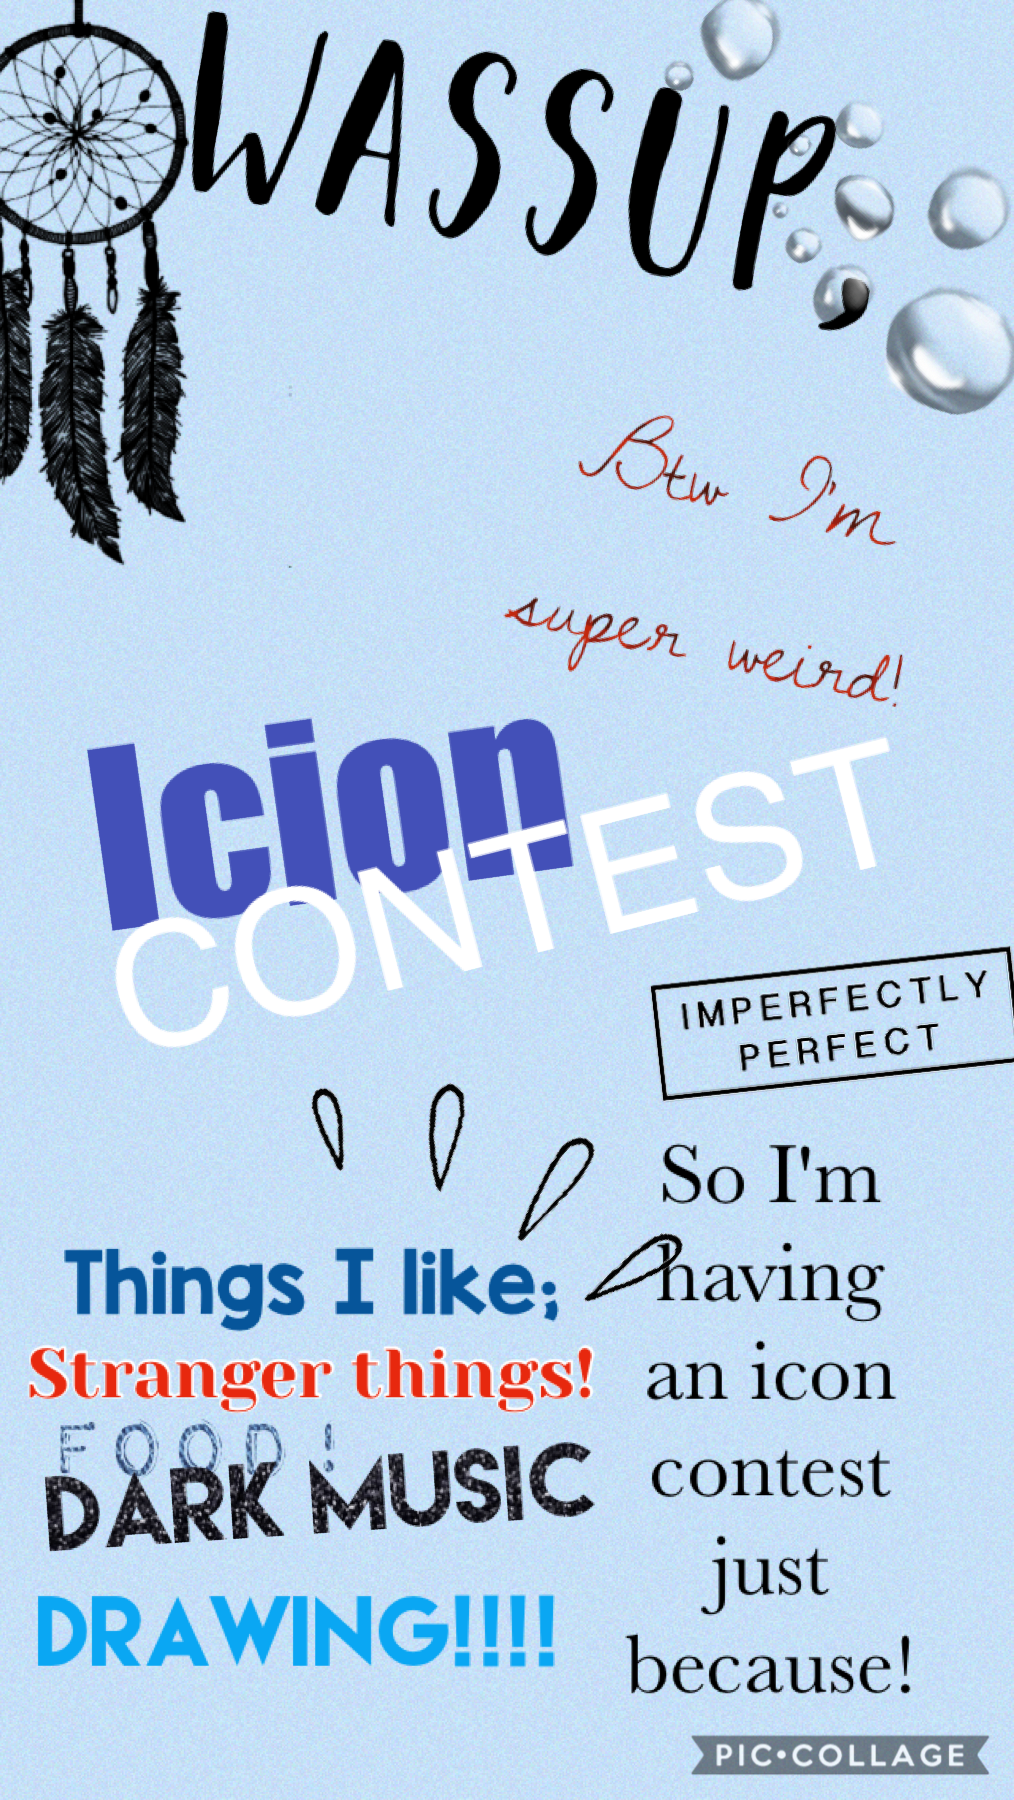 Okay my corn dogs I'm having an icon contest it's finished November 23! 

(You don't have to do it ;-;)
